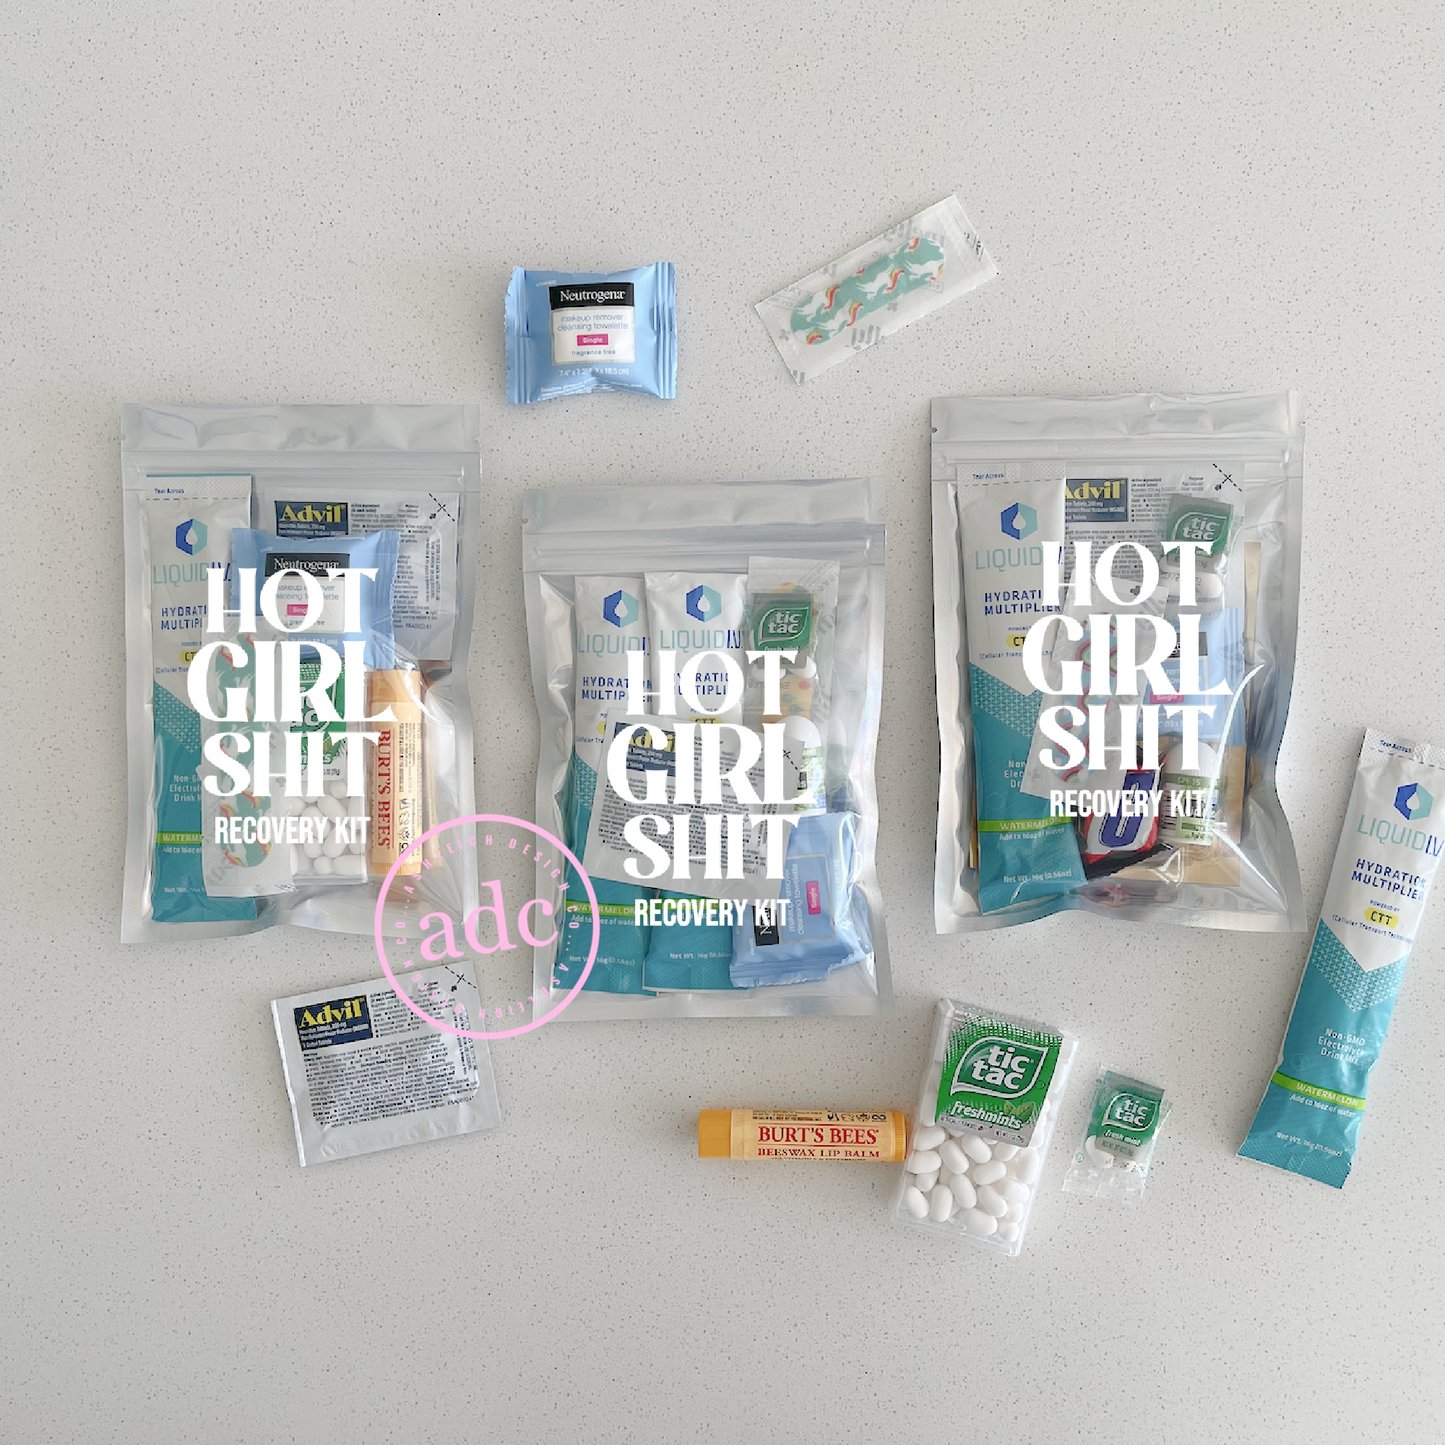 Hot Girl Shit (without Ring) Hangover Kit